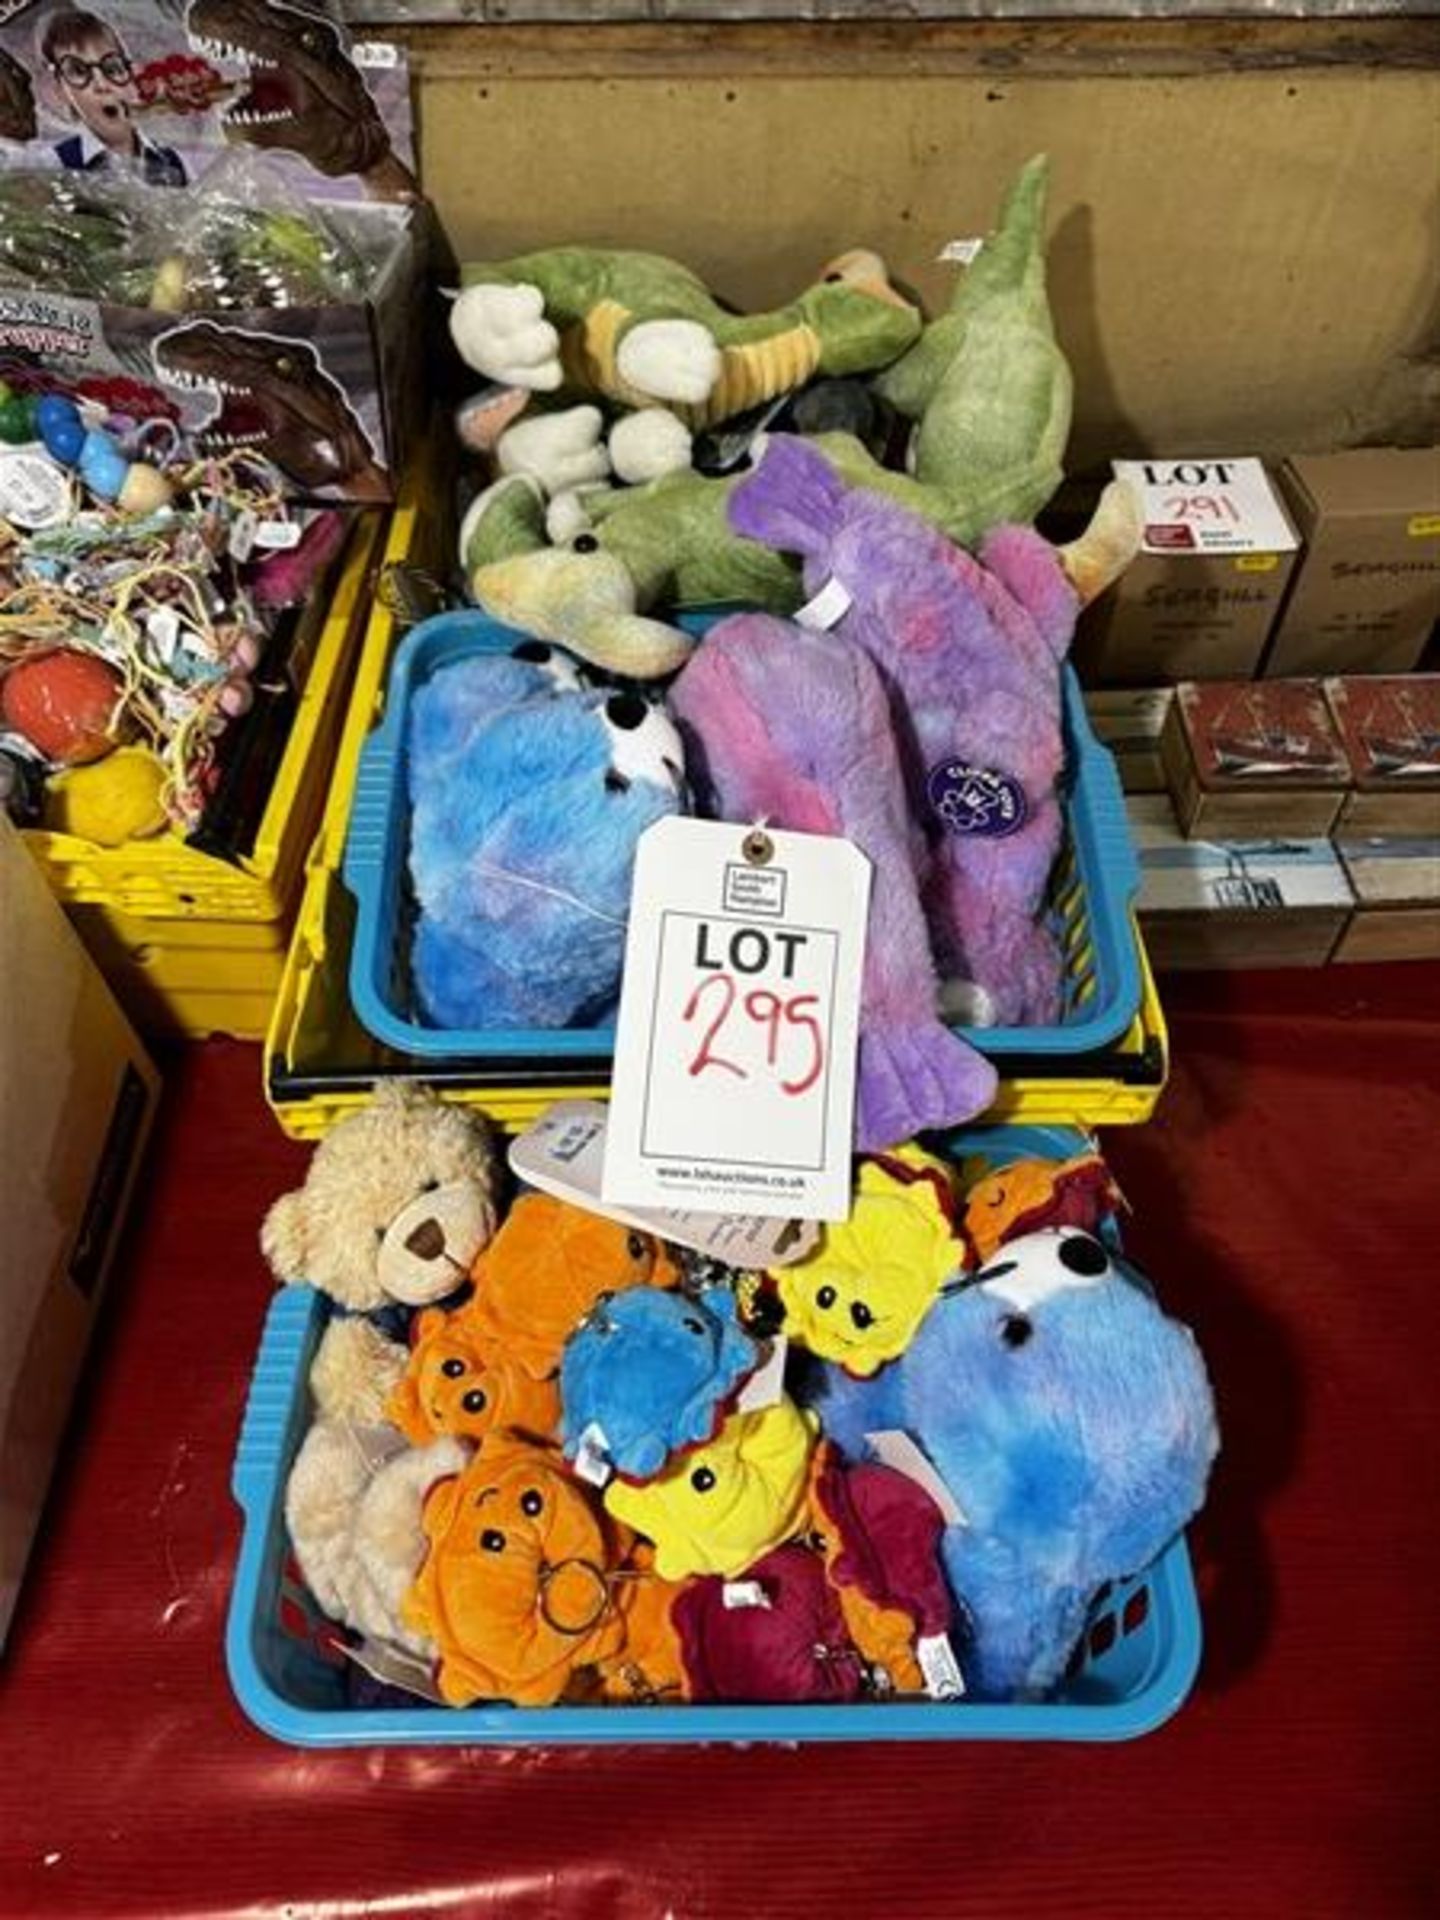 x3 boxes of assorted childrens toys, games and soft animals